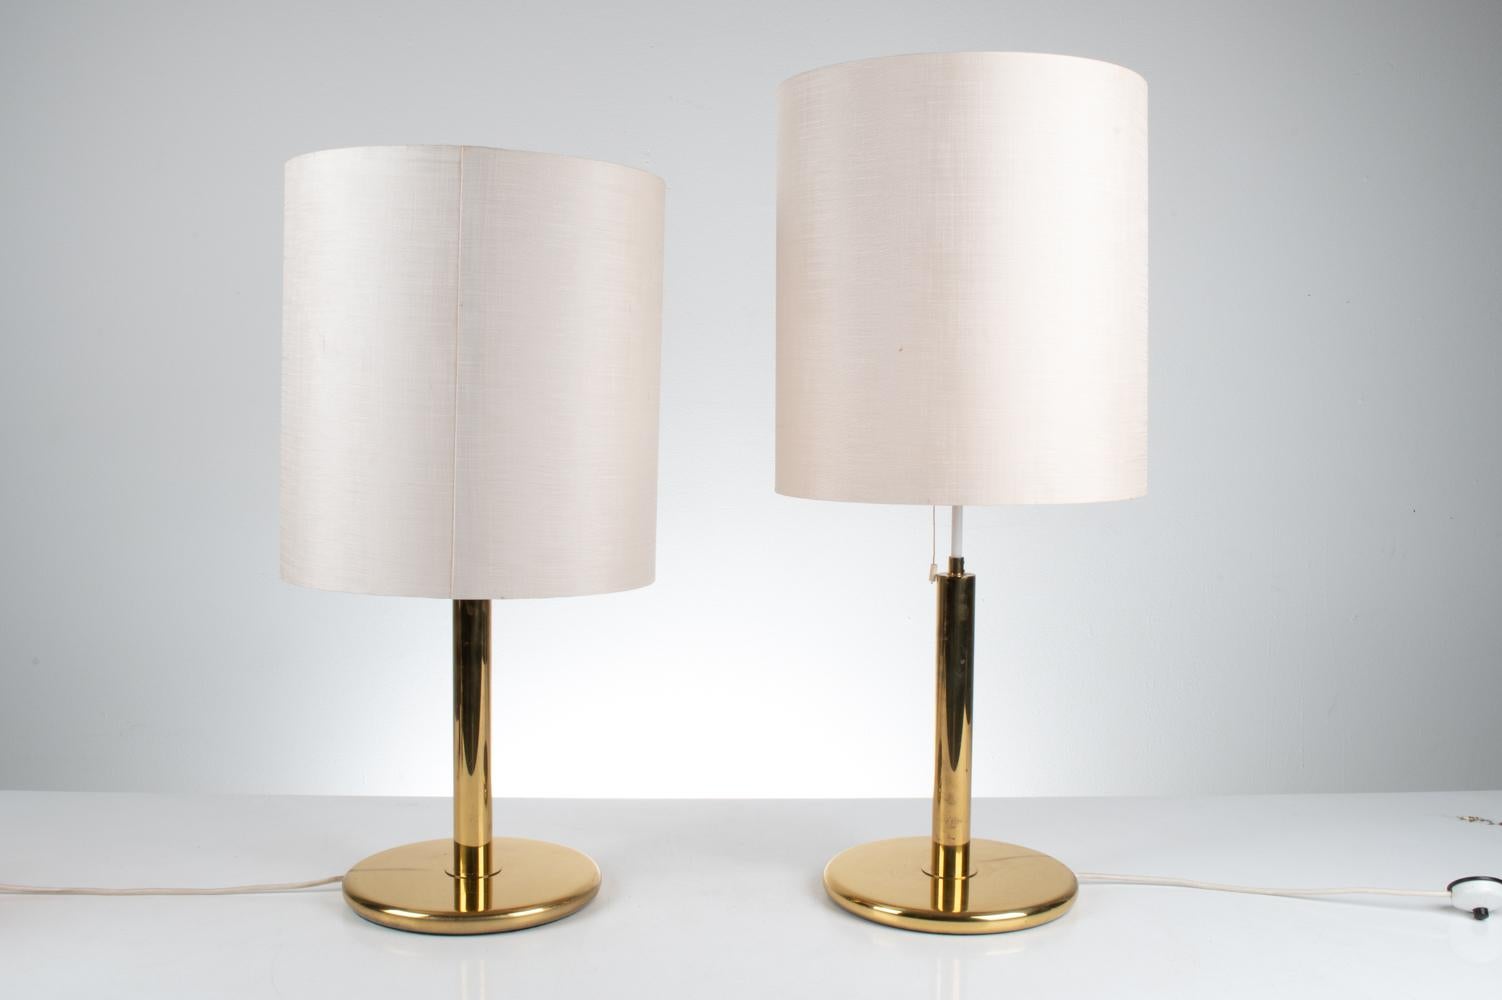 European Pair of 1970's Hollywood Regency Revival Adjustable-Height Brass Table Lamps For Sale